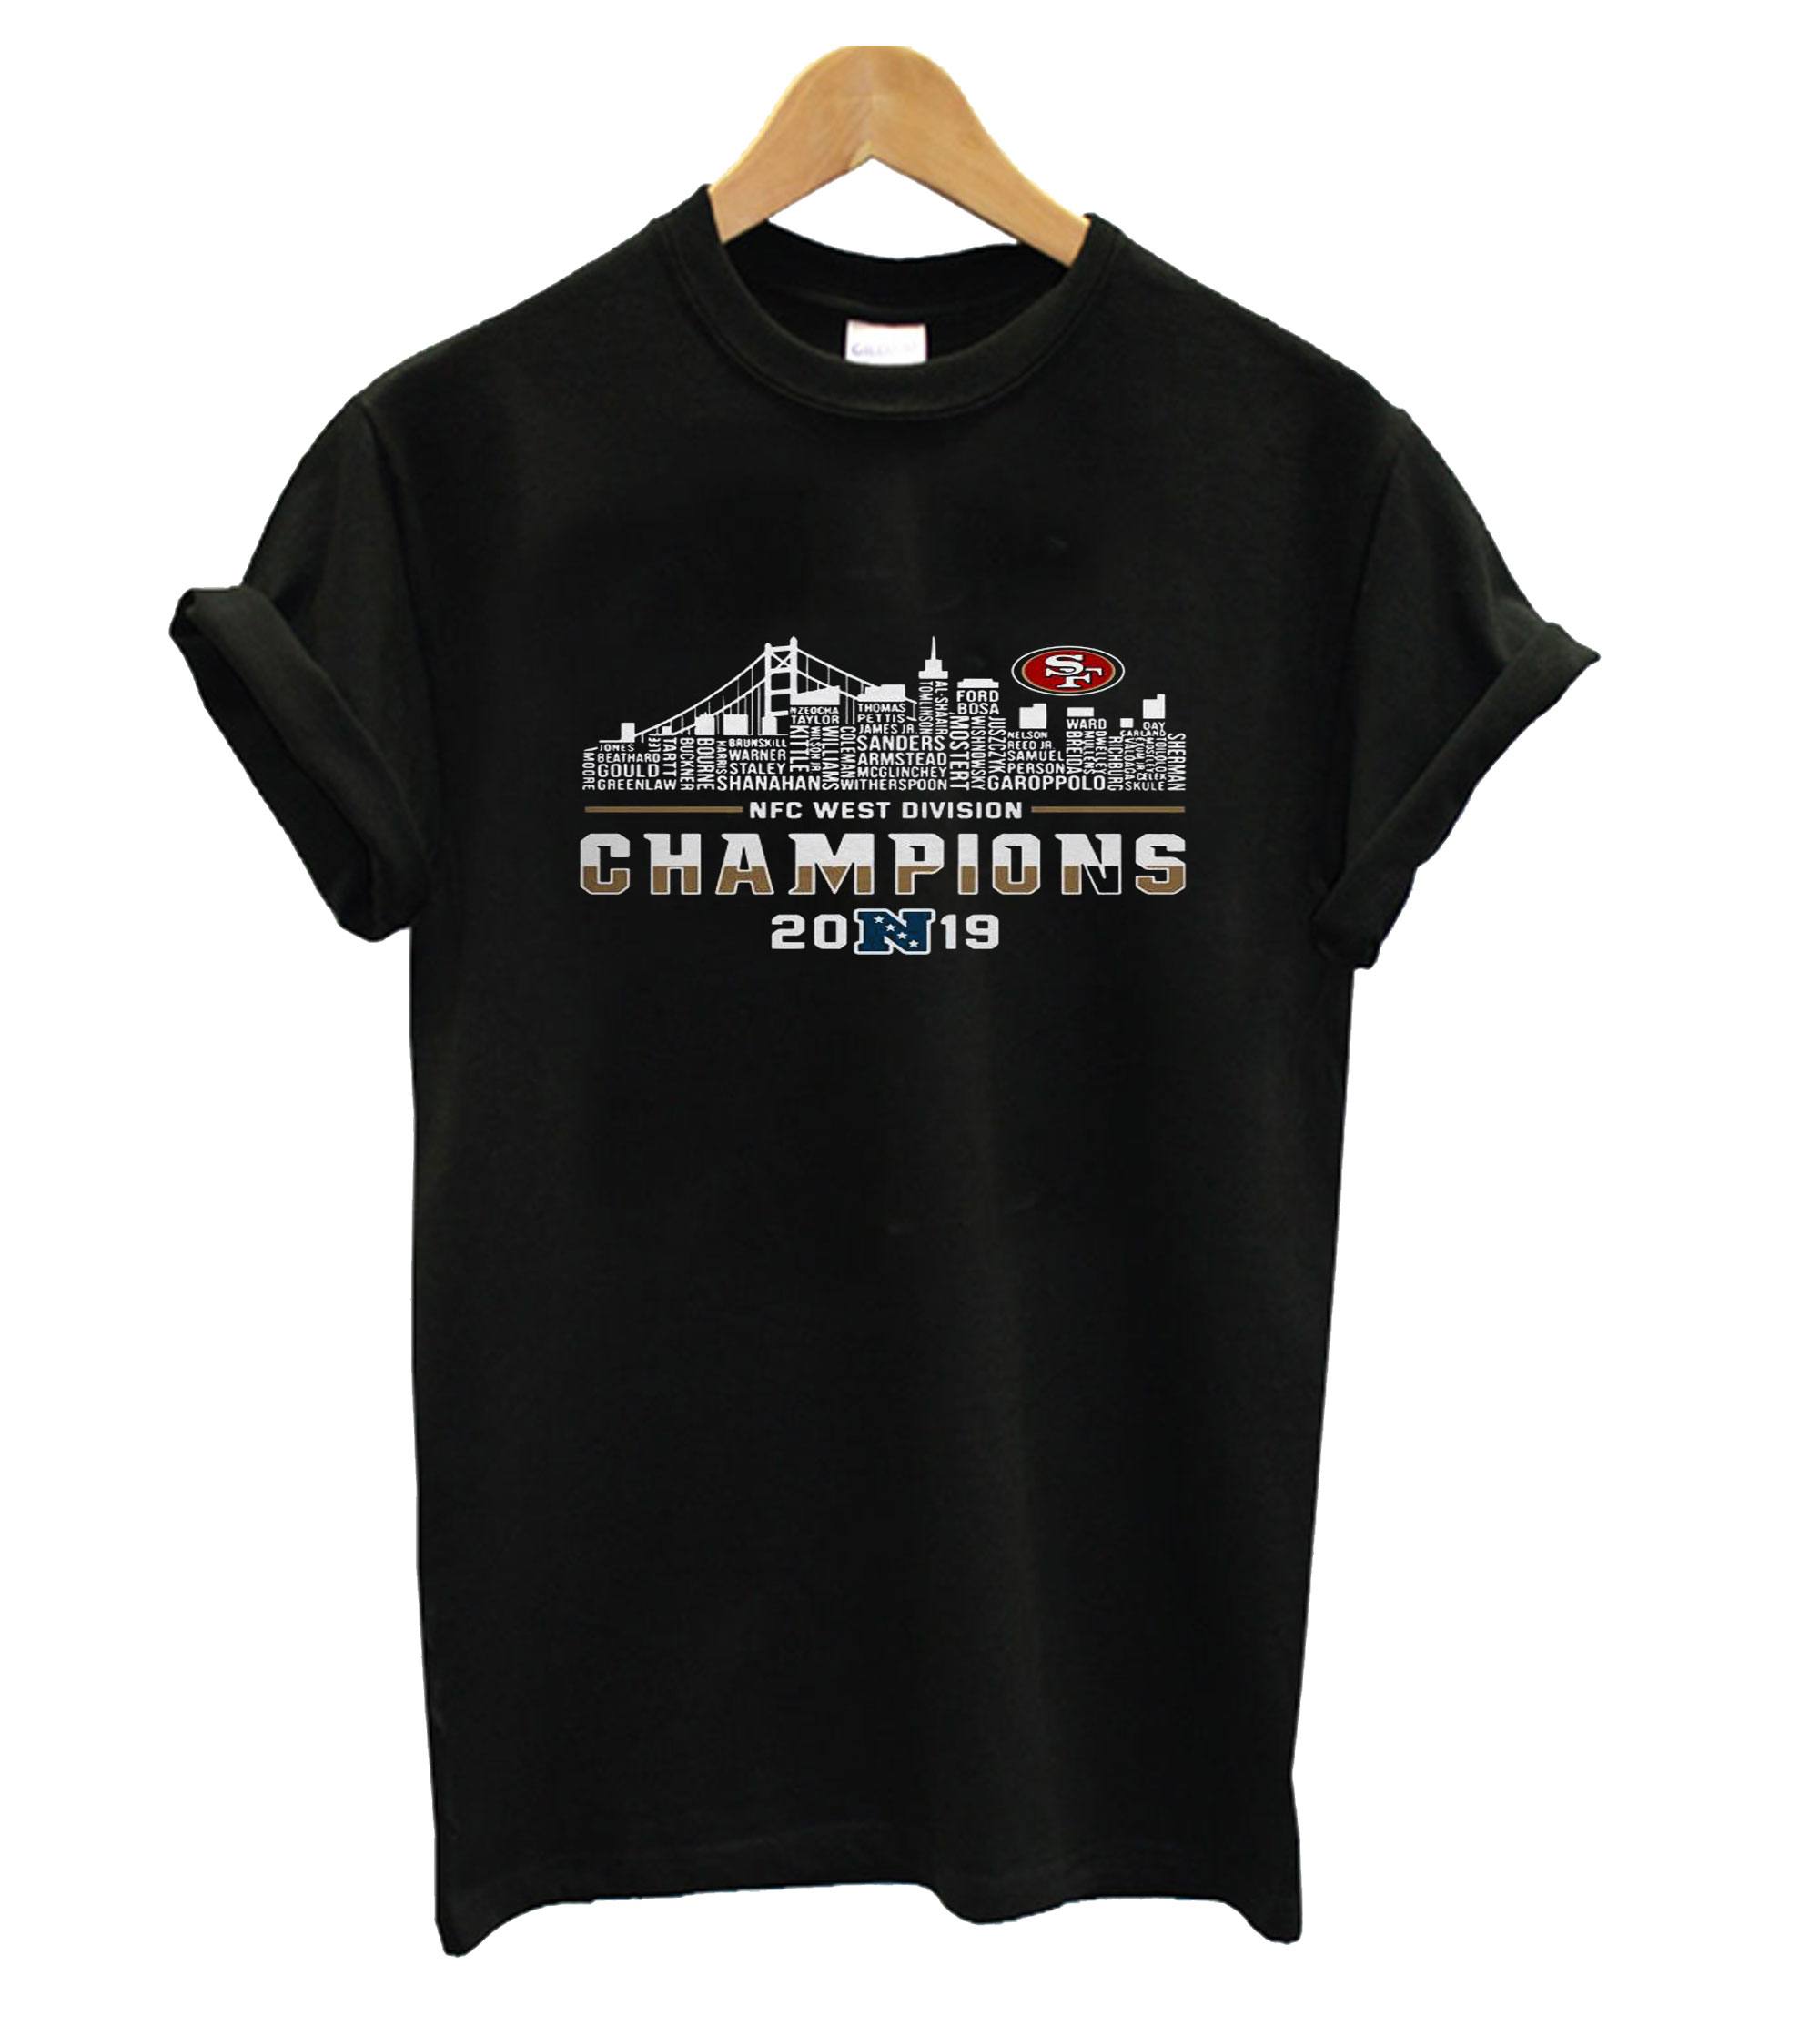 Champion 2019 T Shirt which is made to follow current trends